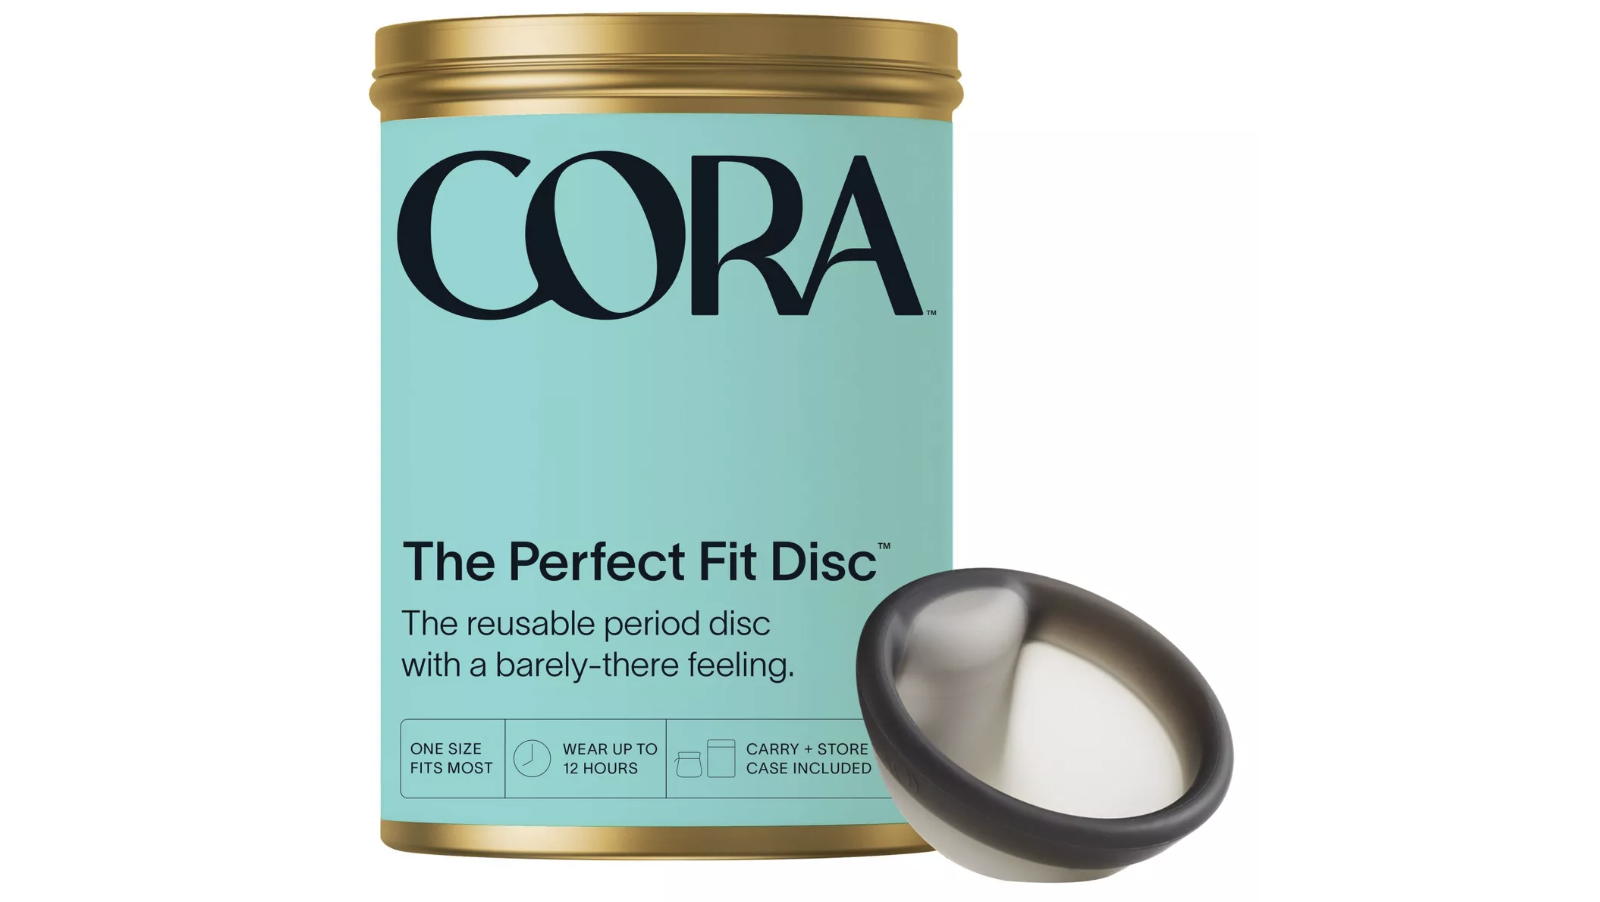 Cora Disc + Cleanser Gift, Reusable Period Disc